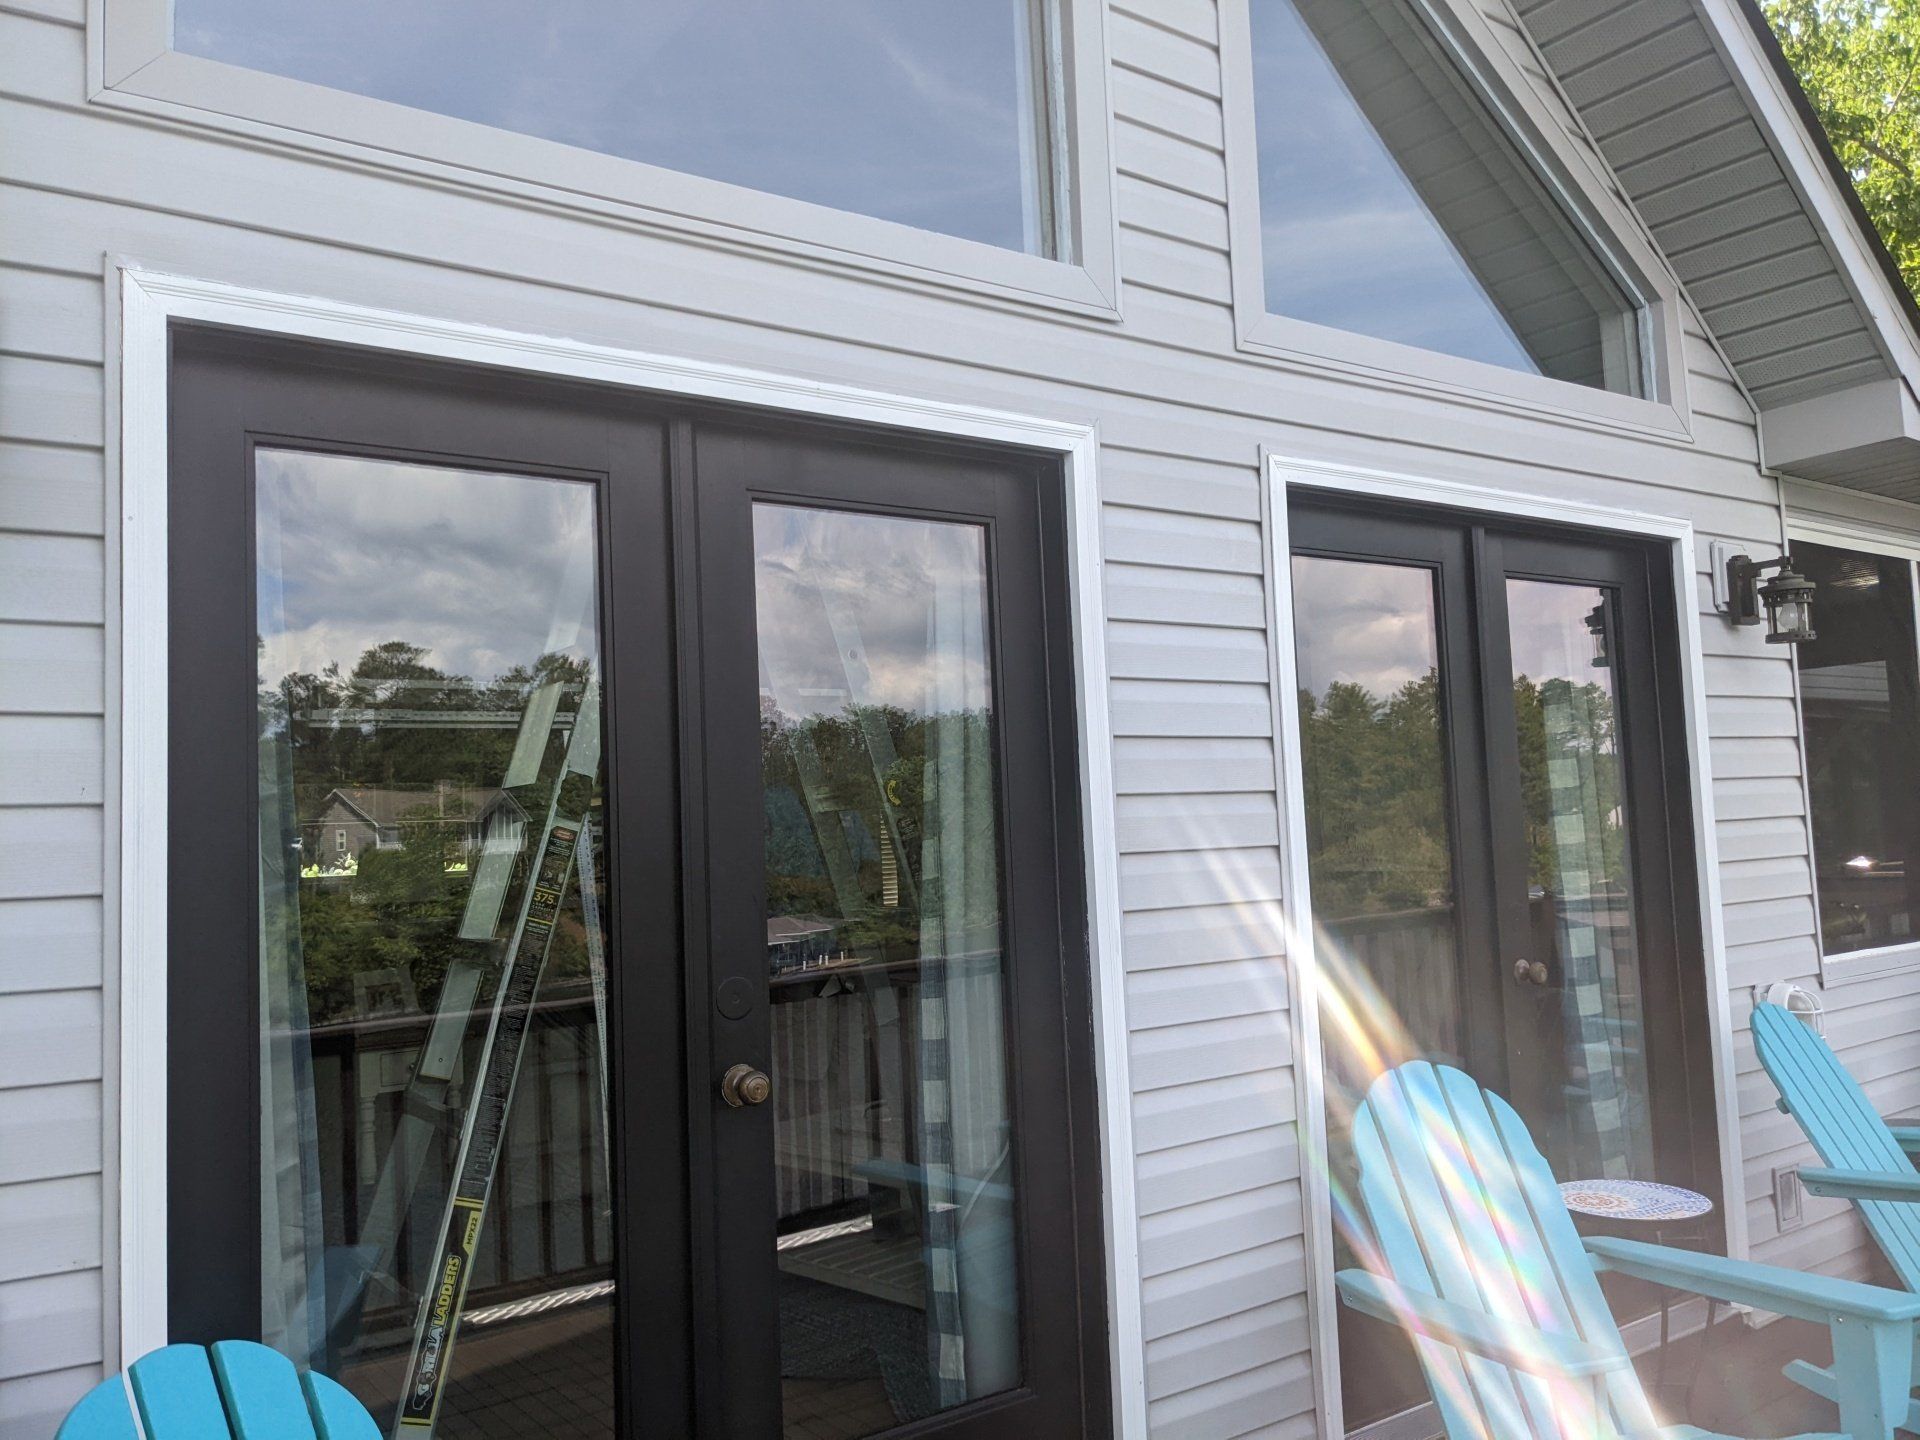 Home Tinting in AL - High Monthly Energy Costs Were Cut Along with Bright UV Sun Glare at lake home in AL